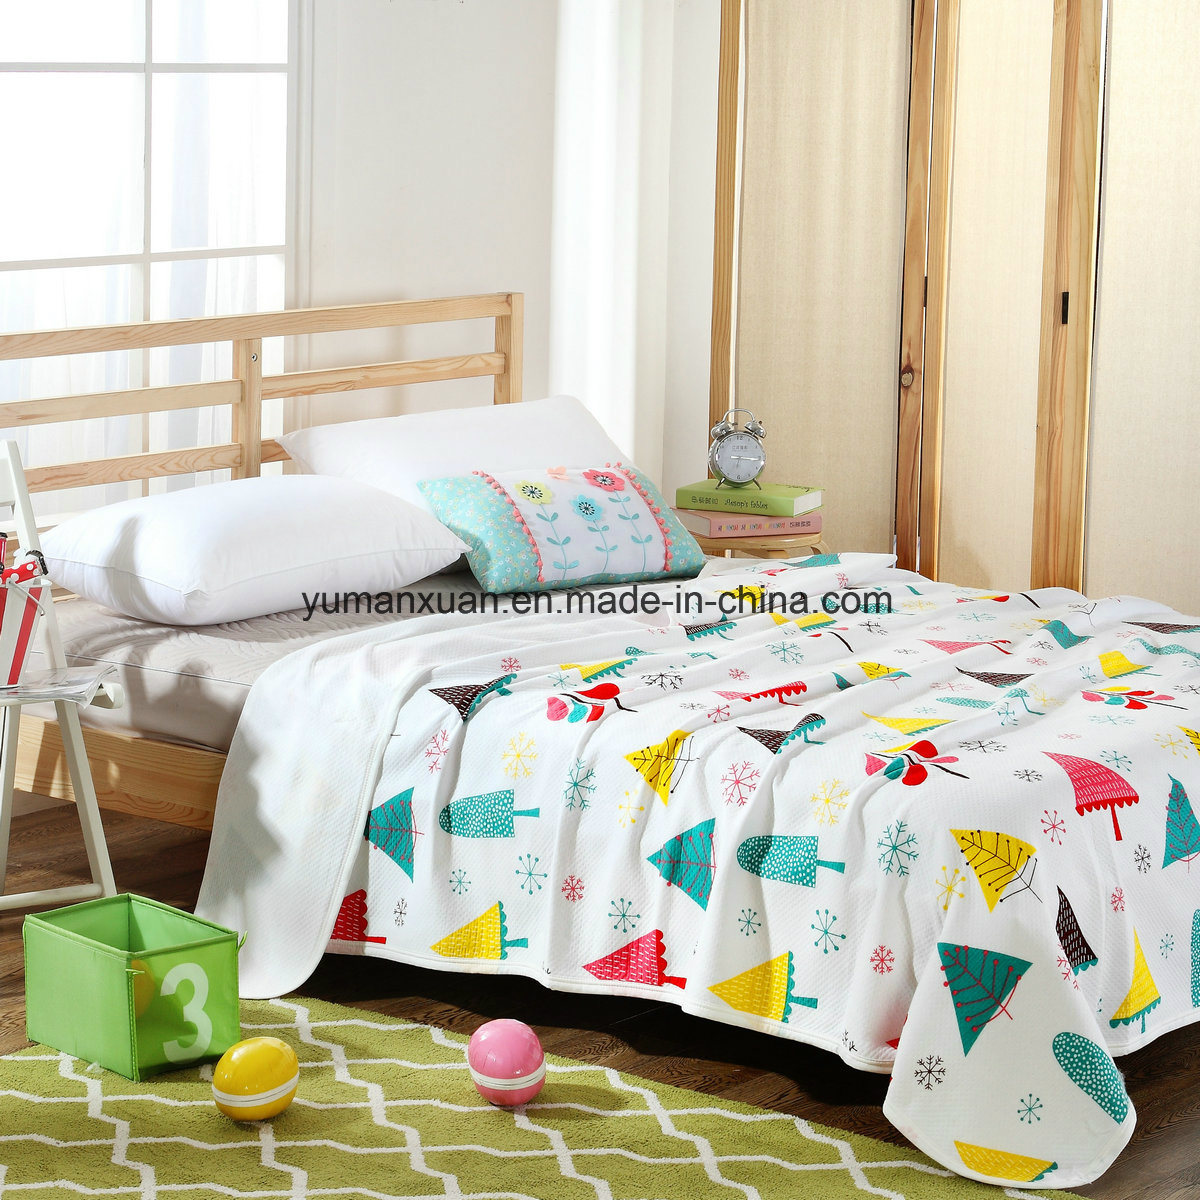 Knitted 100%Cotton Quilt of Textile for Summer Tree